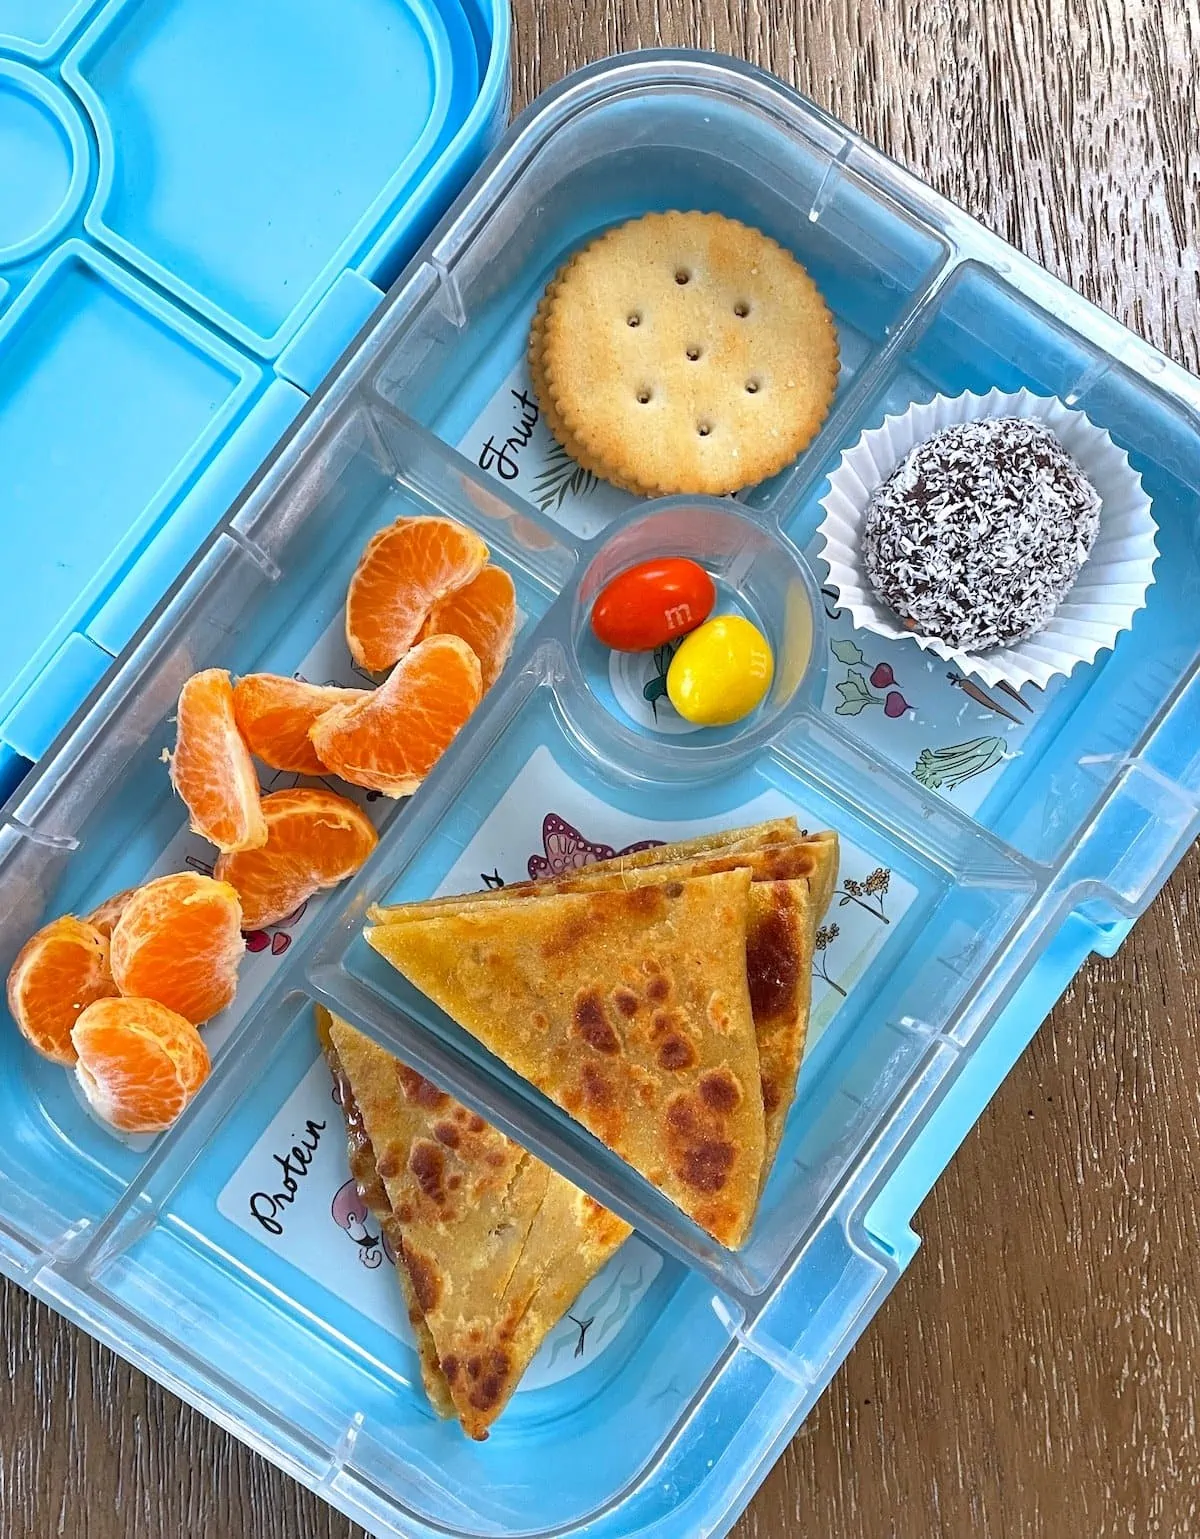 Lunch box with aloo paratha, oranges, and ladoo